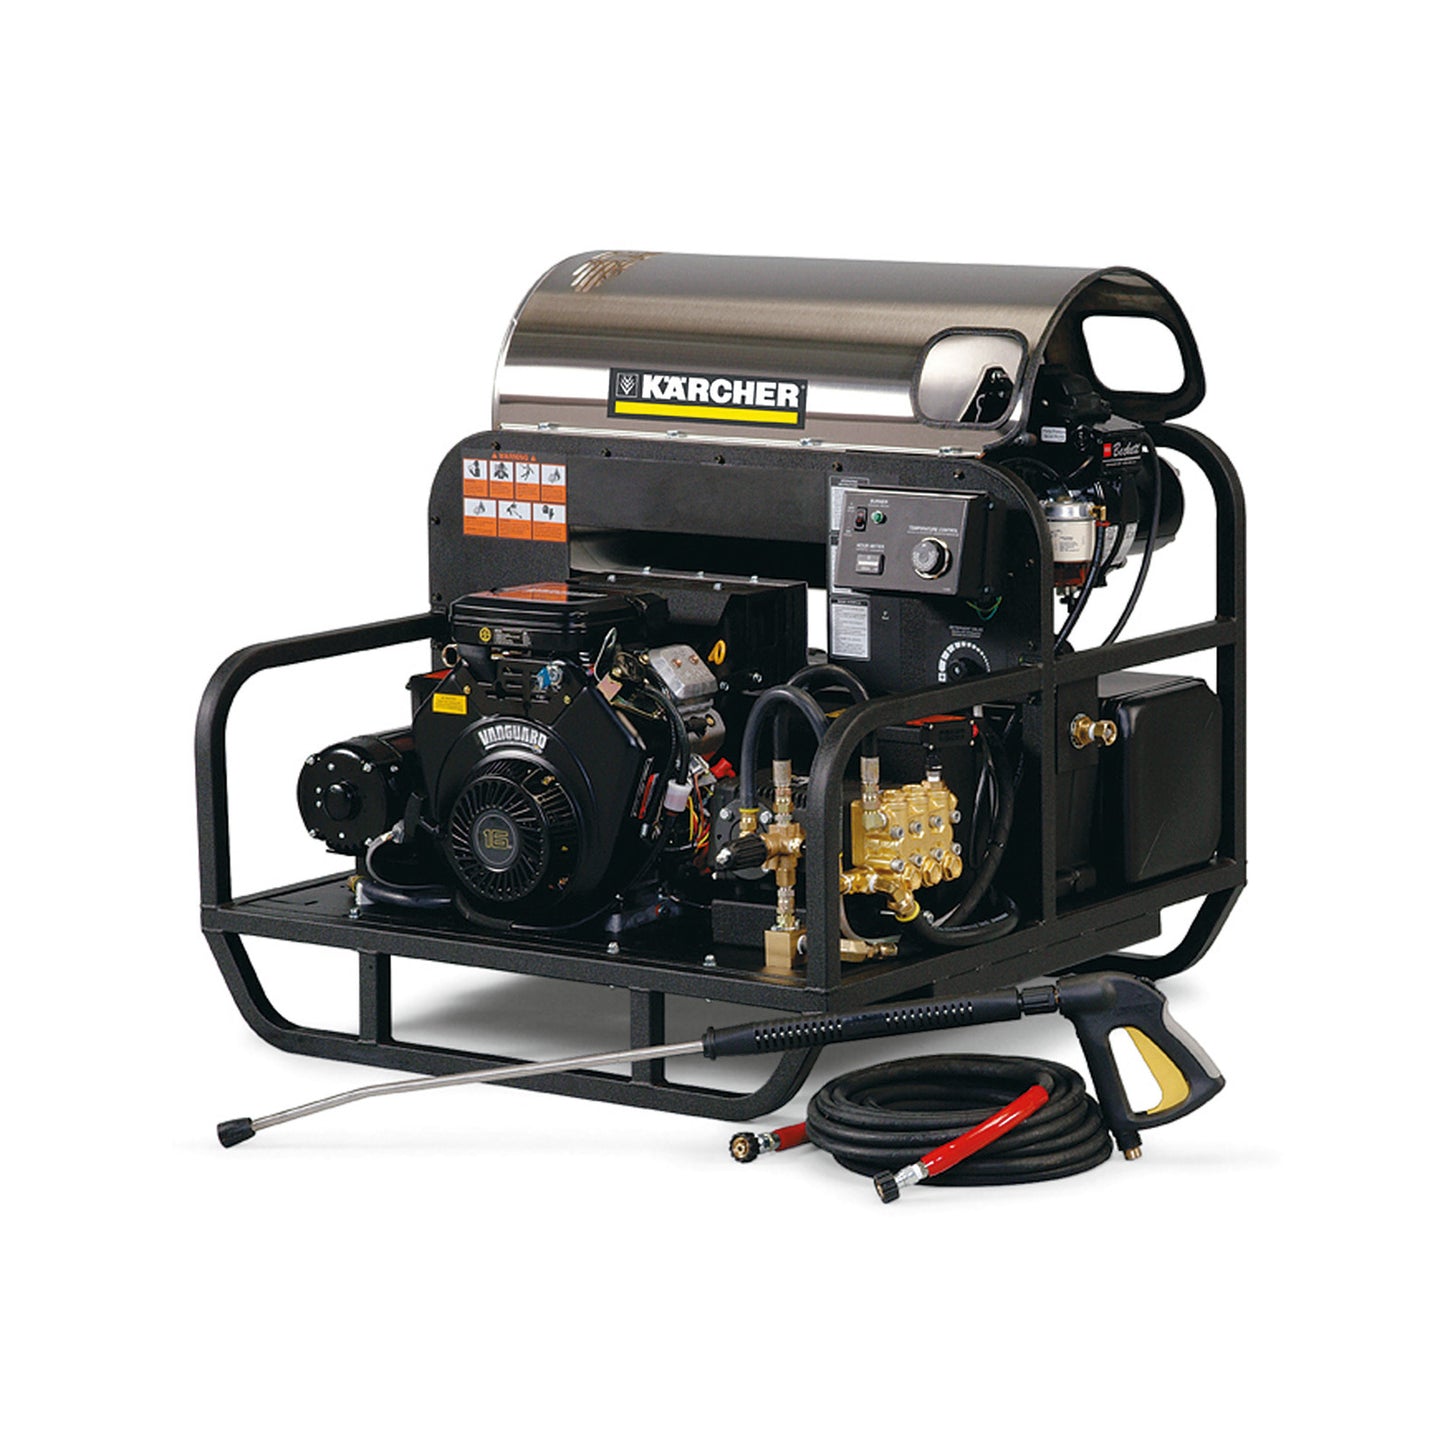 Karcher Jalapao Series Hot Water Pressure Washer